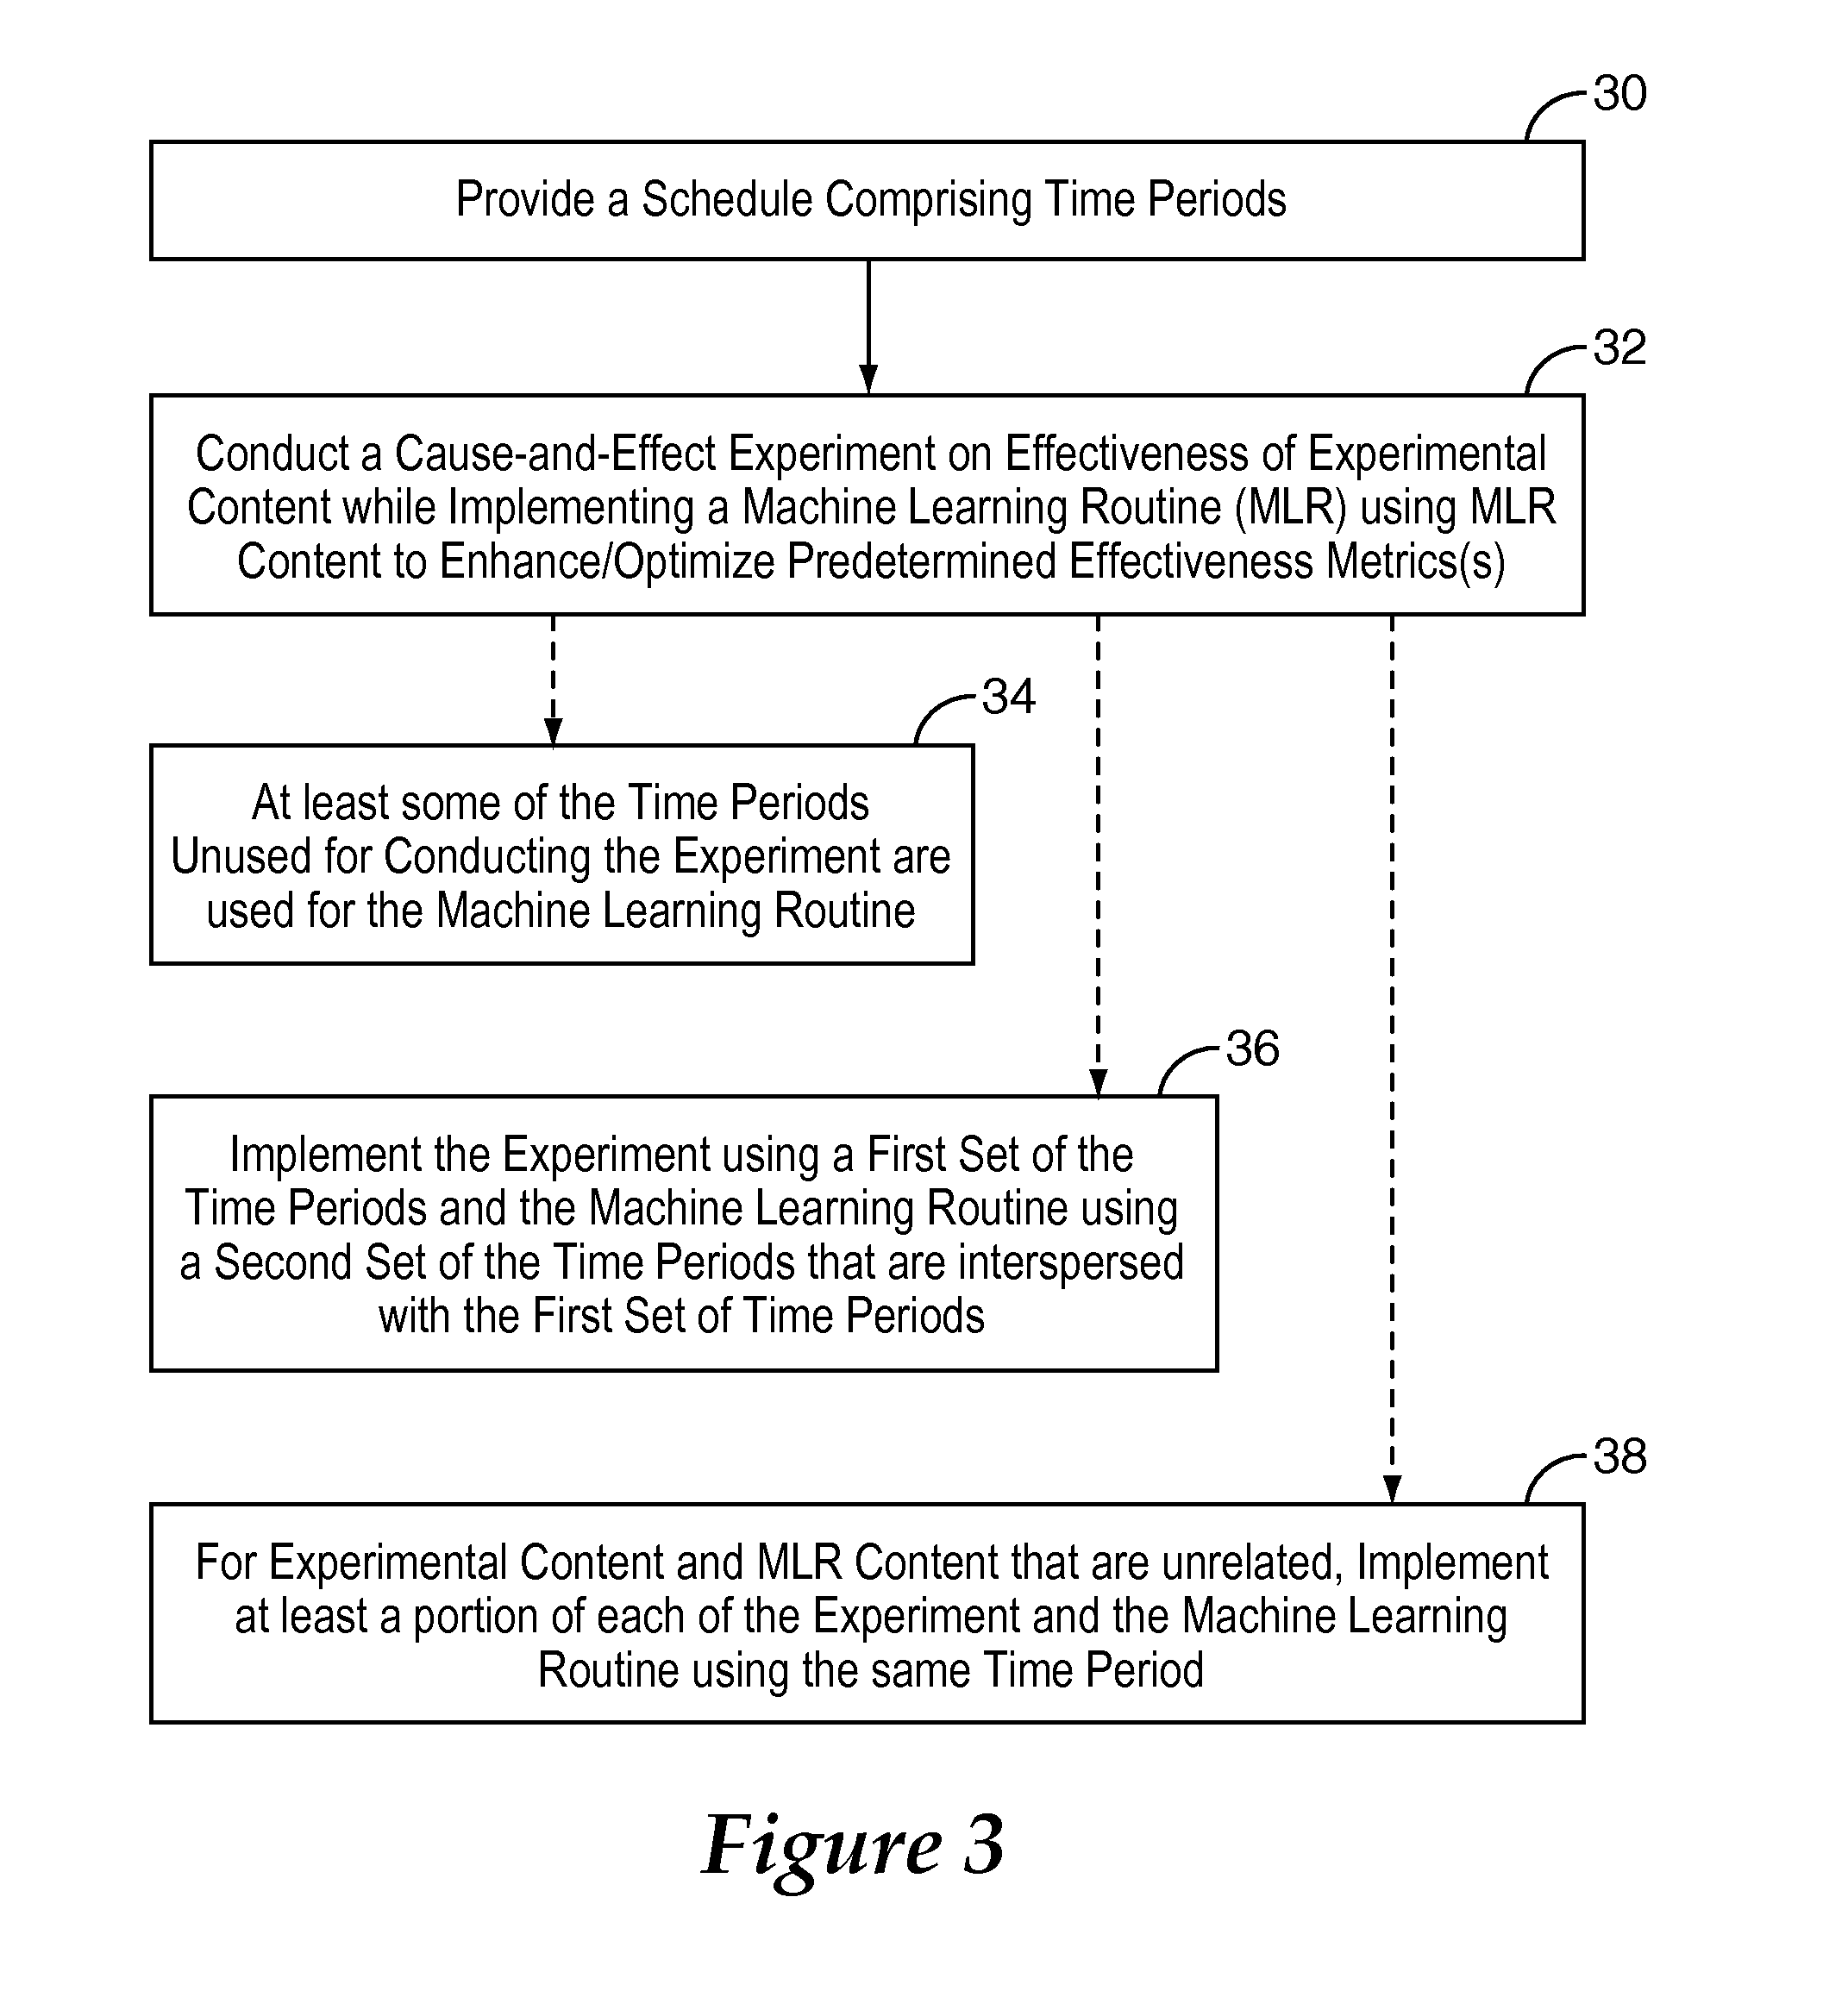 System and method for concurrently conducting cause-and-effect experiments on content effectiveness and adjusting content distribution to optimize business objectives